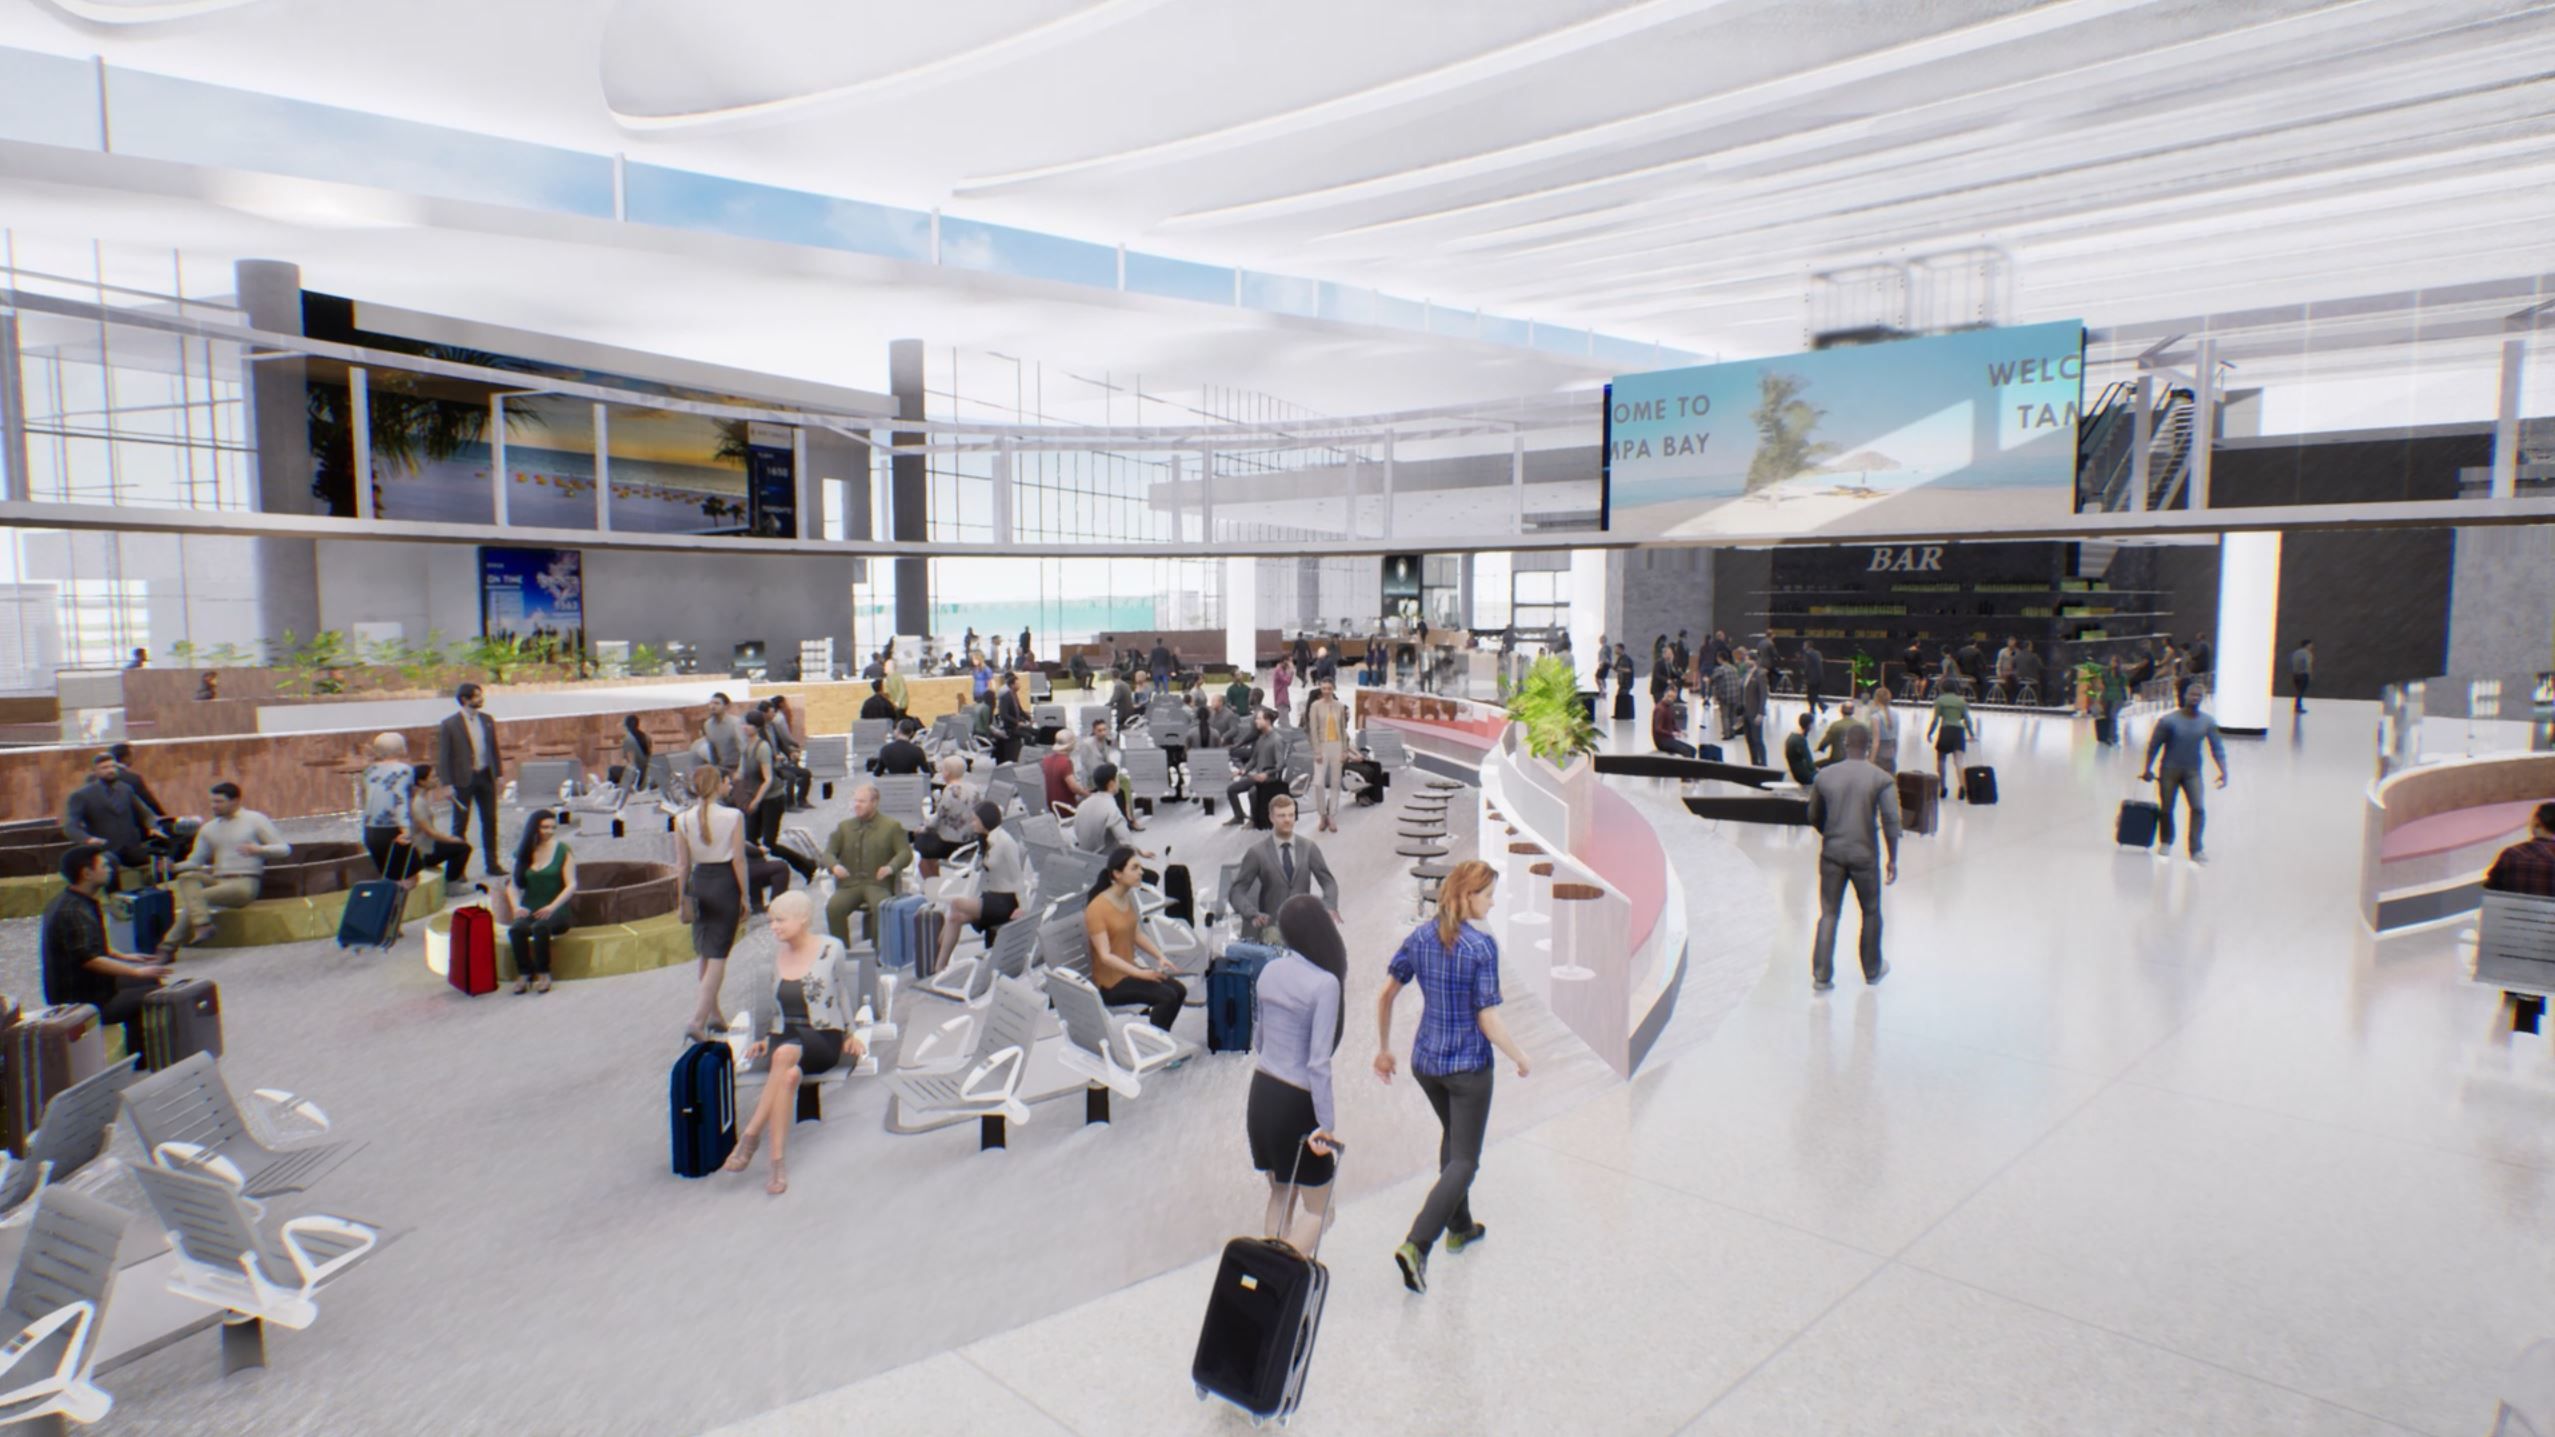 Rendering of the inside of the proposed Airside D terminal at TPA